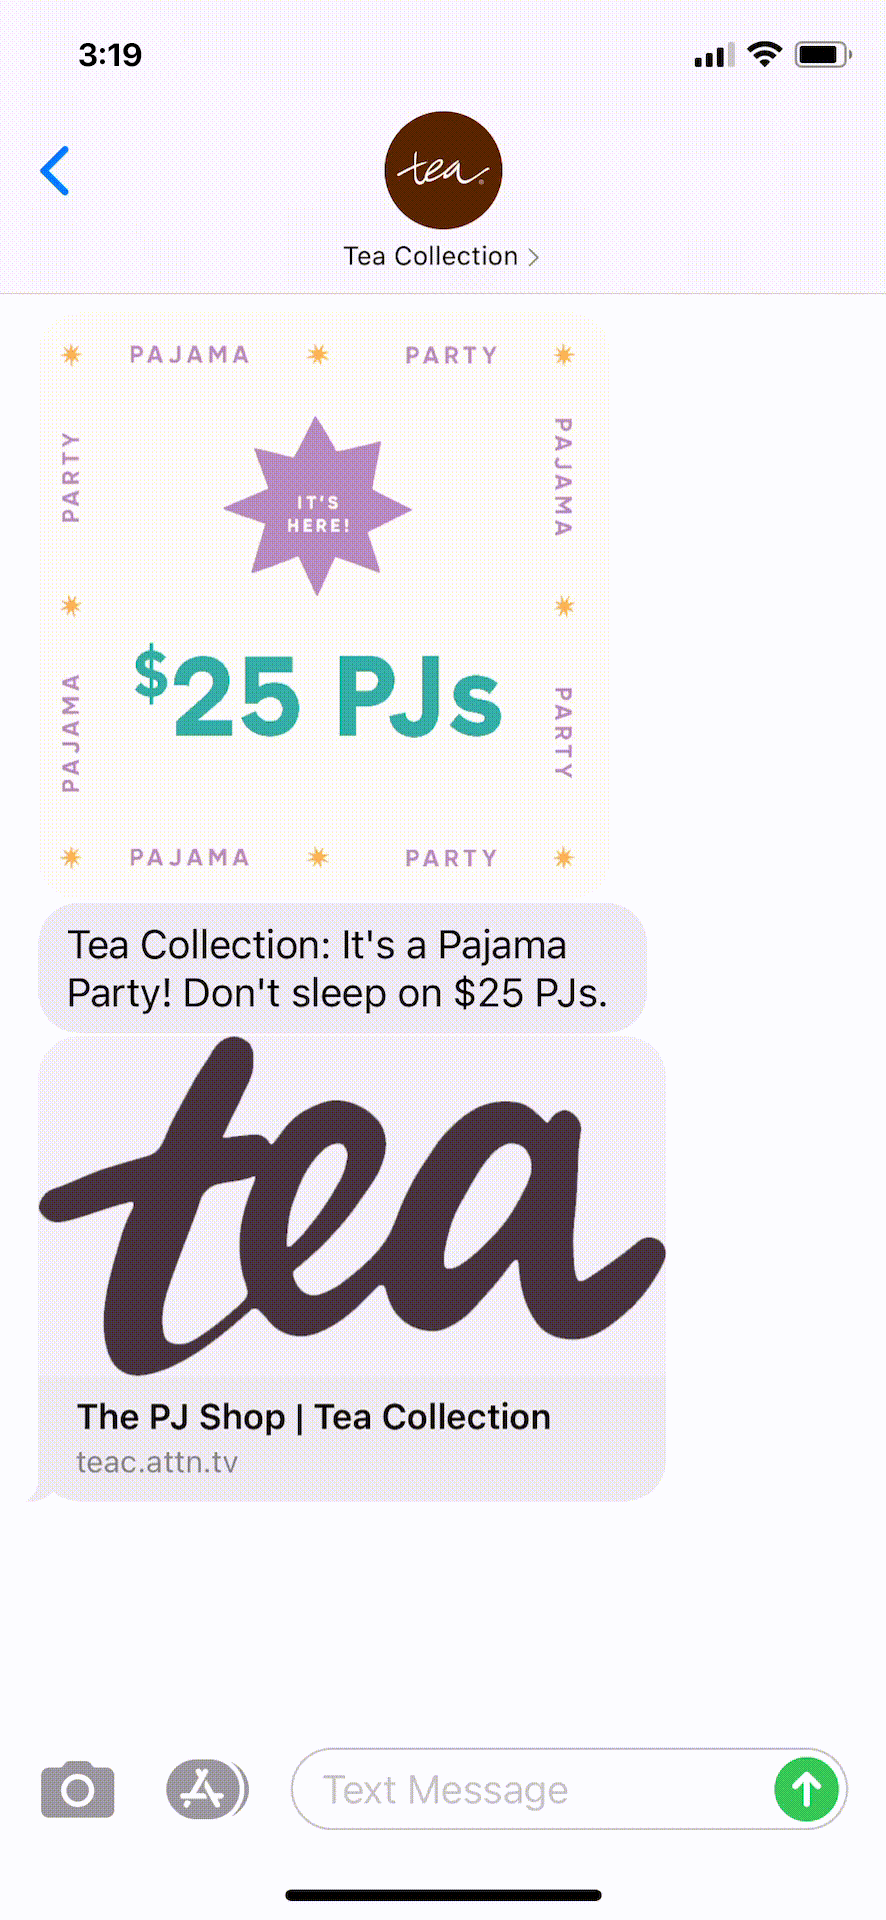 Tea-Collection-Text-Message-Marketing-Example-05.07.2021-